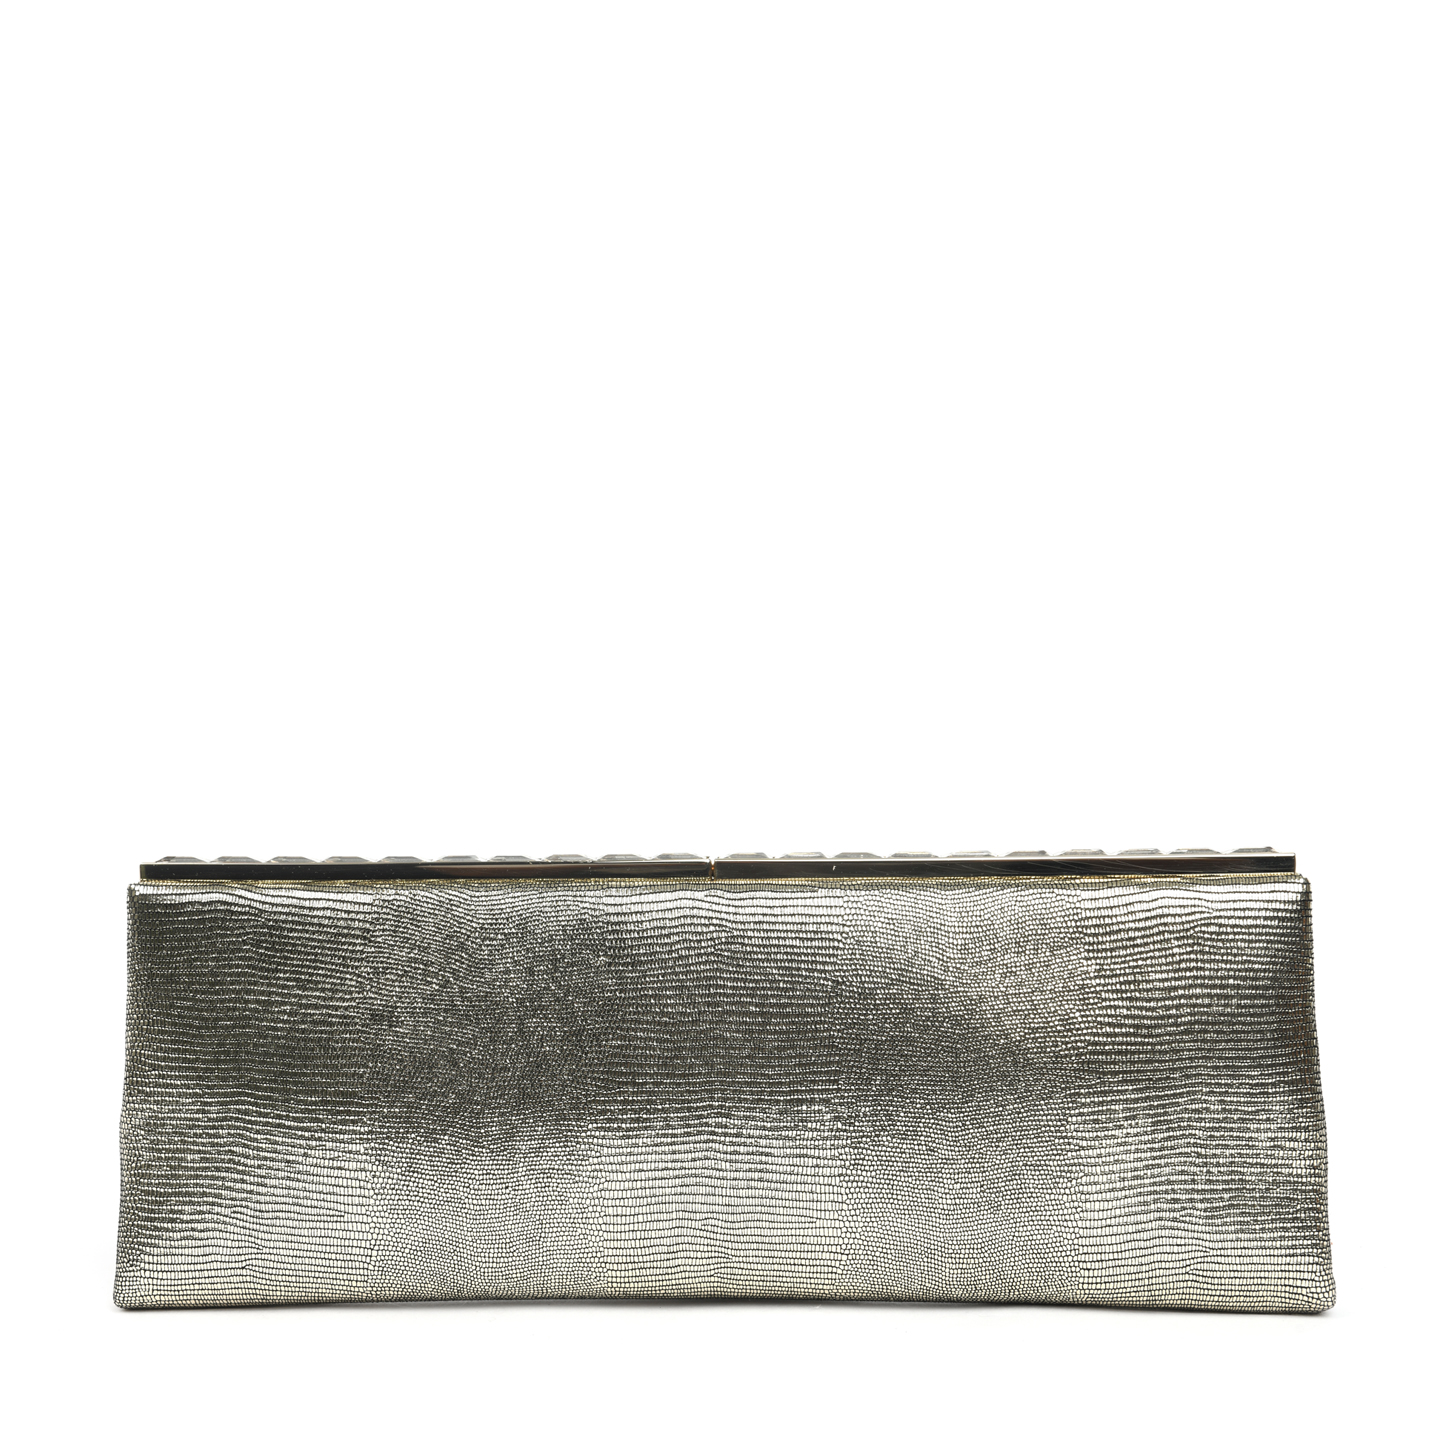 Jimmy Choo Ciggy Metallic Snake Embossed Leather Clutch - LabelCentric